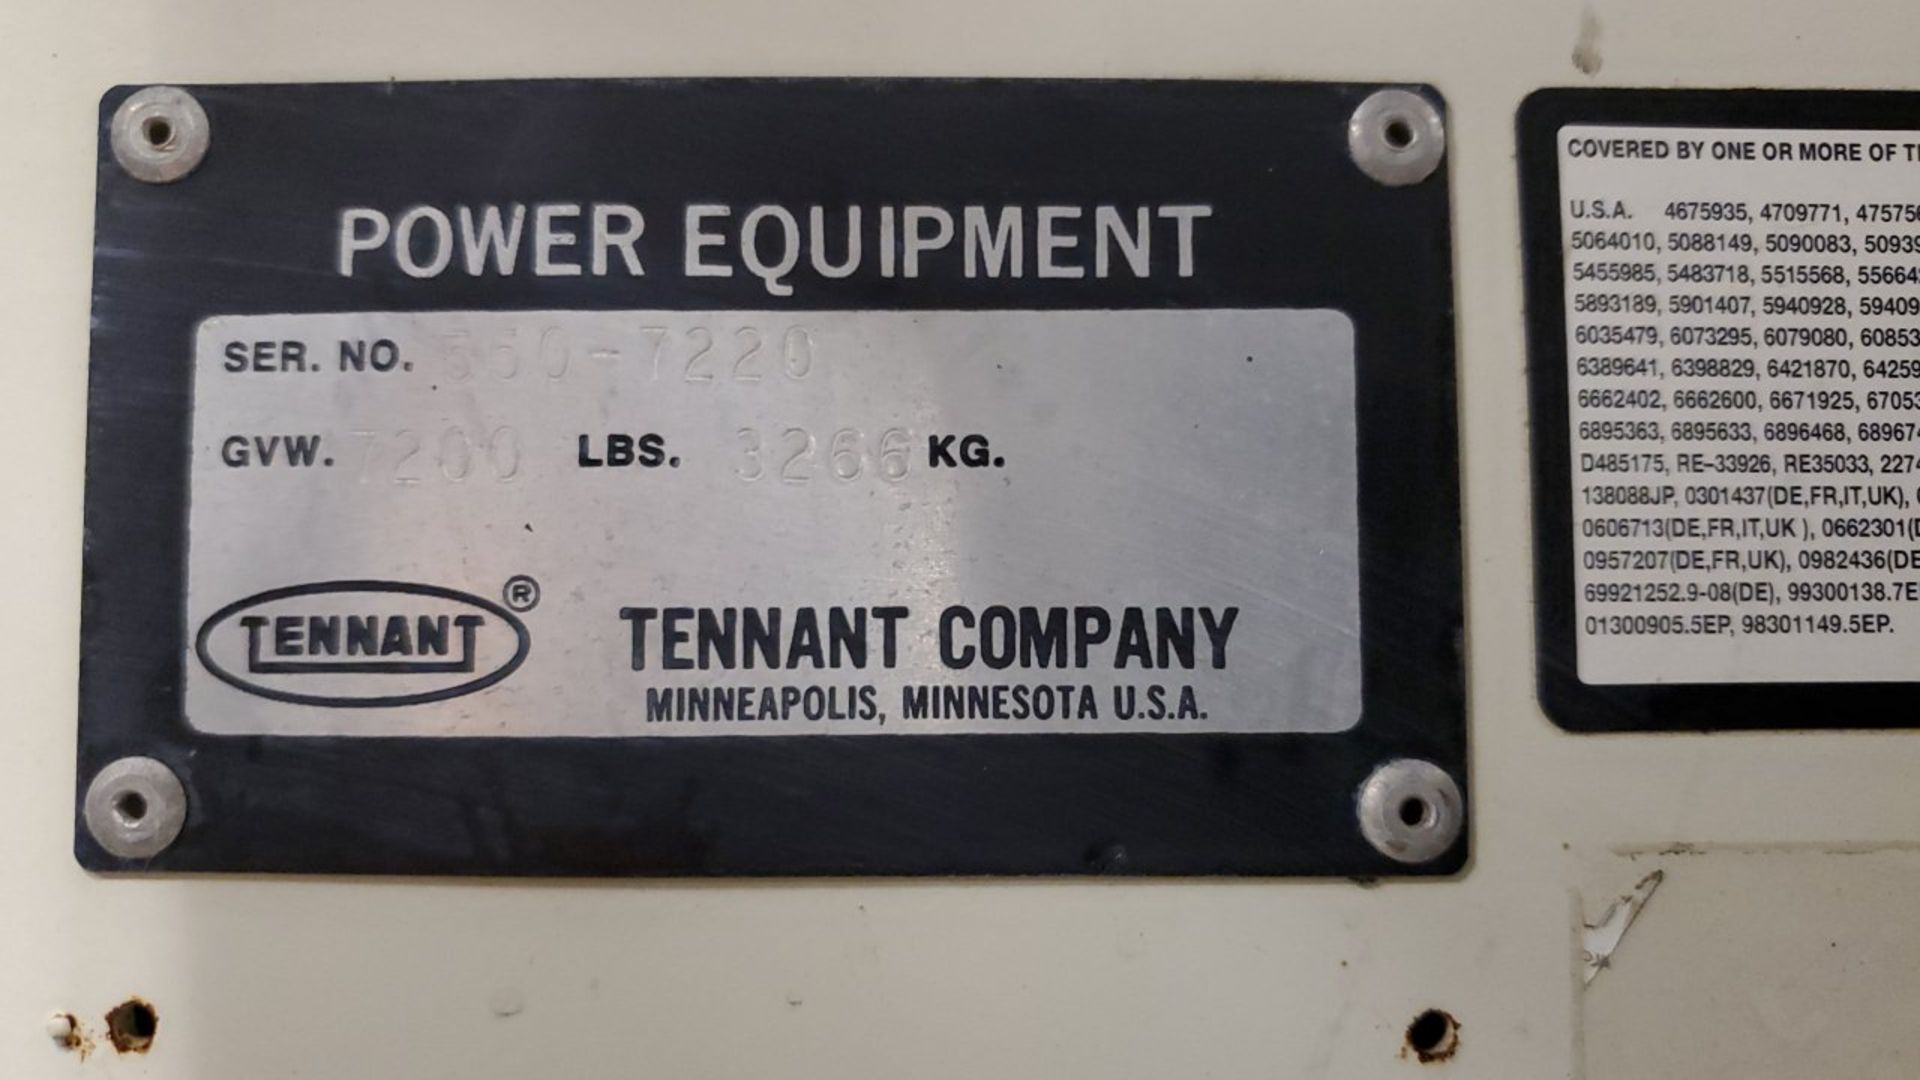 Tennant Power Sweeper - Image 11 of 11